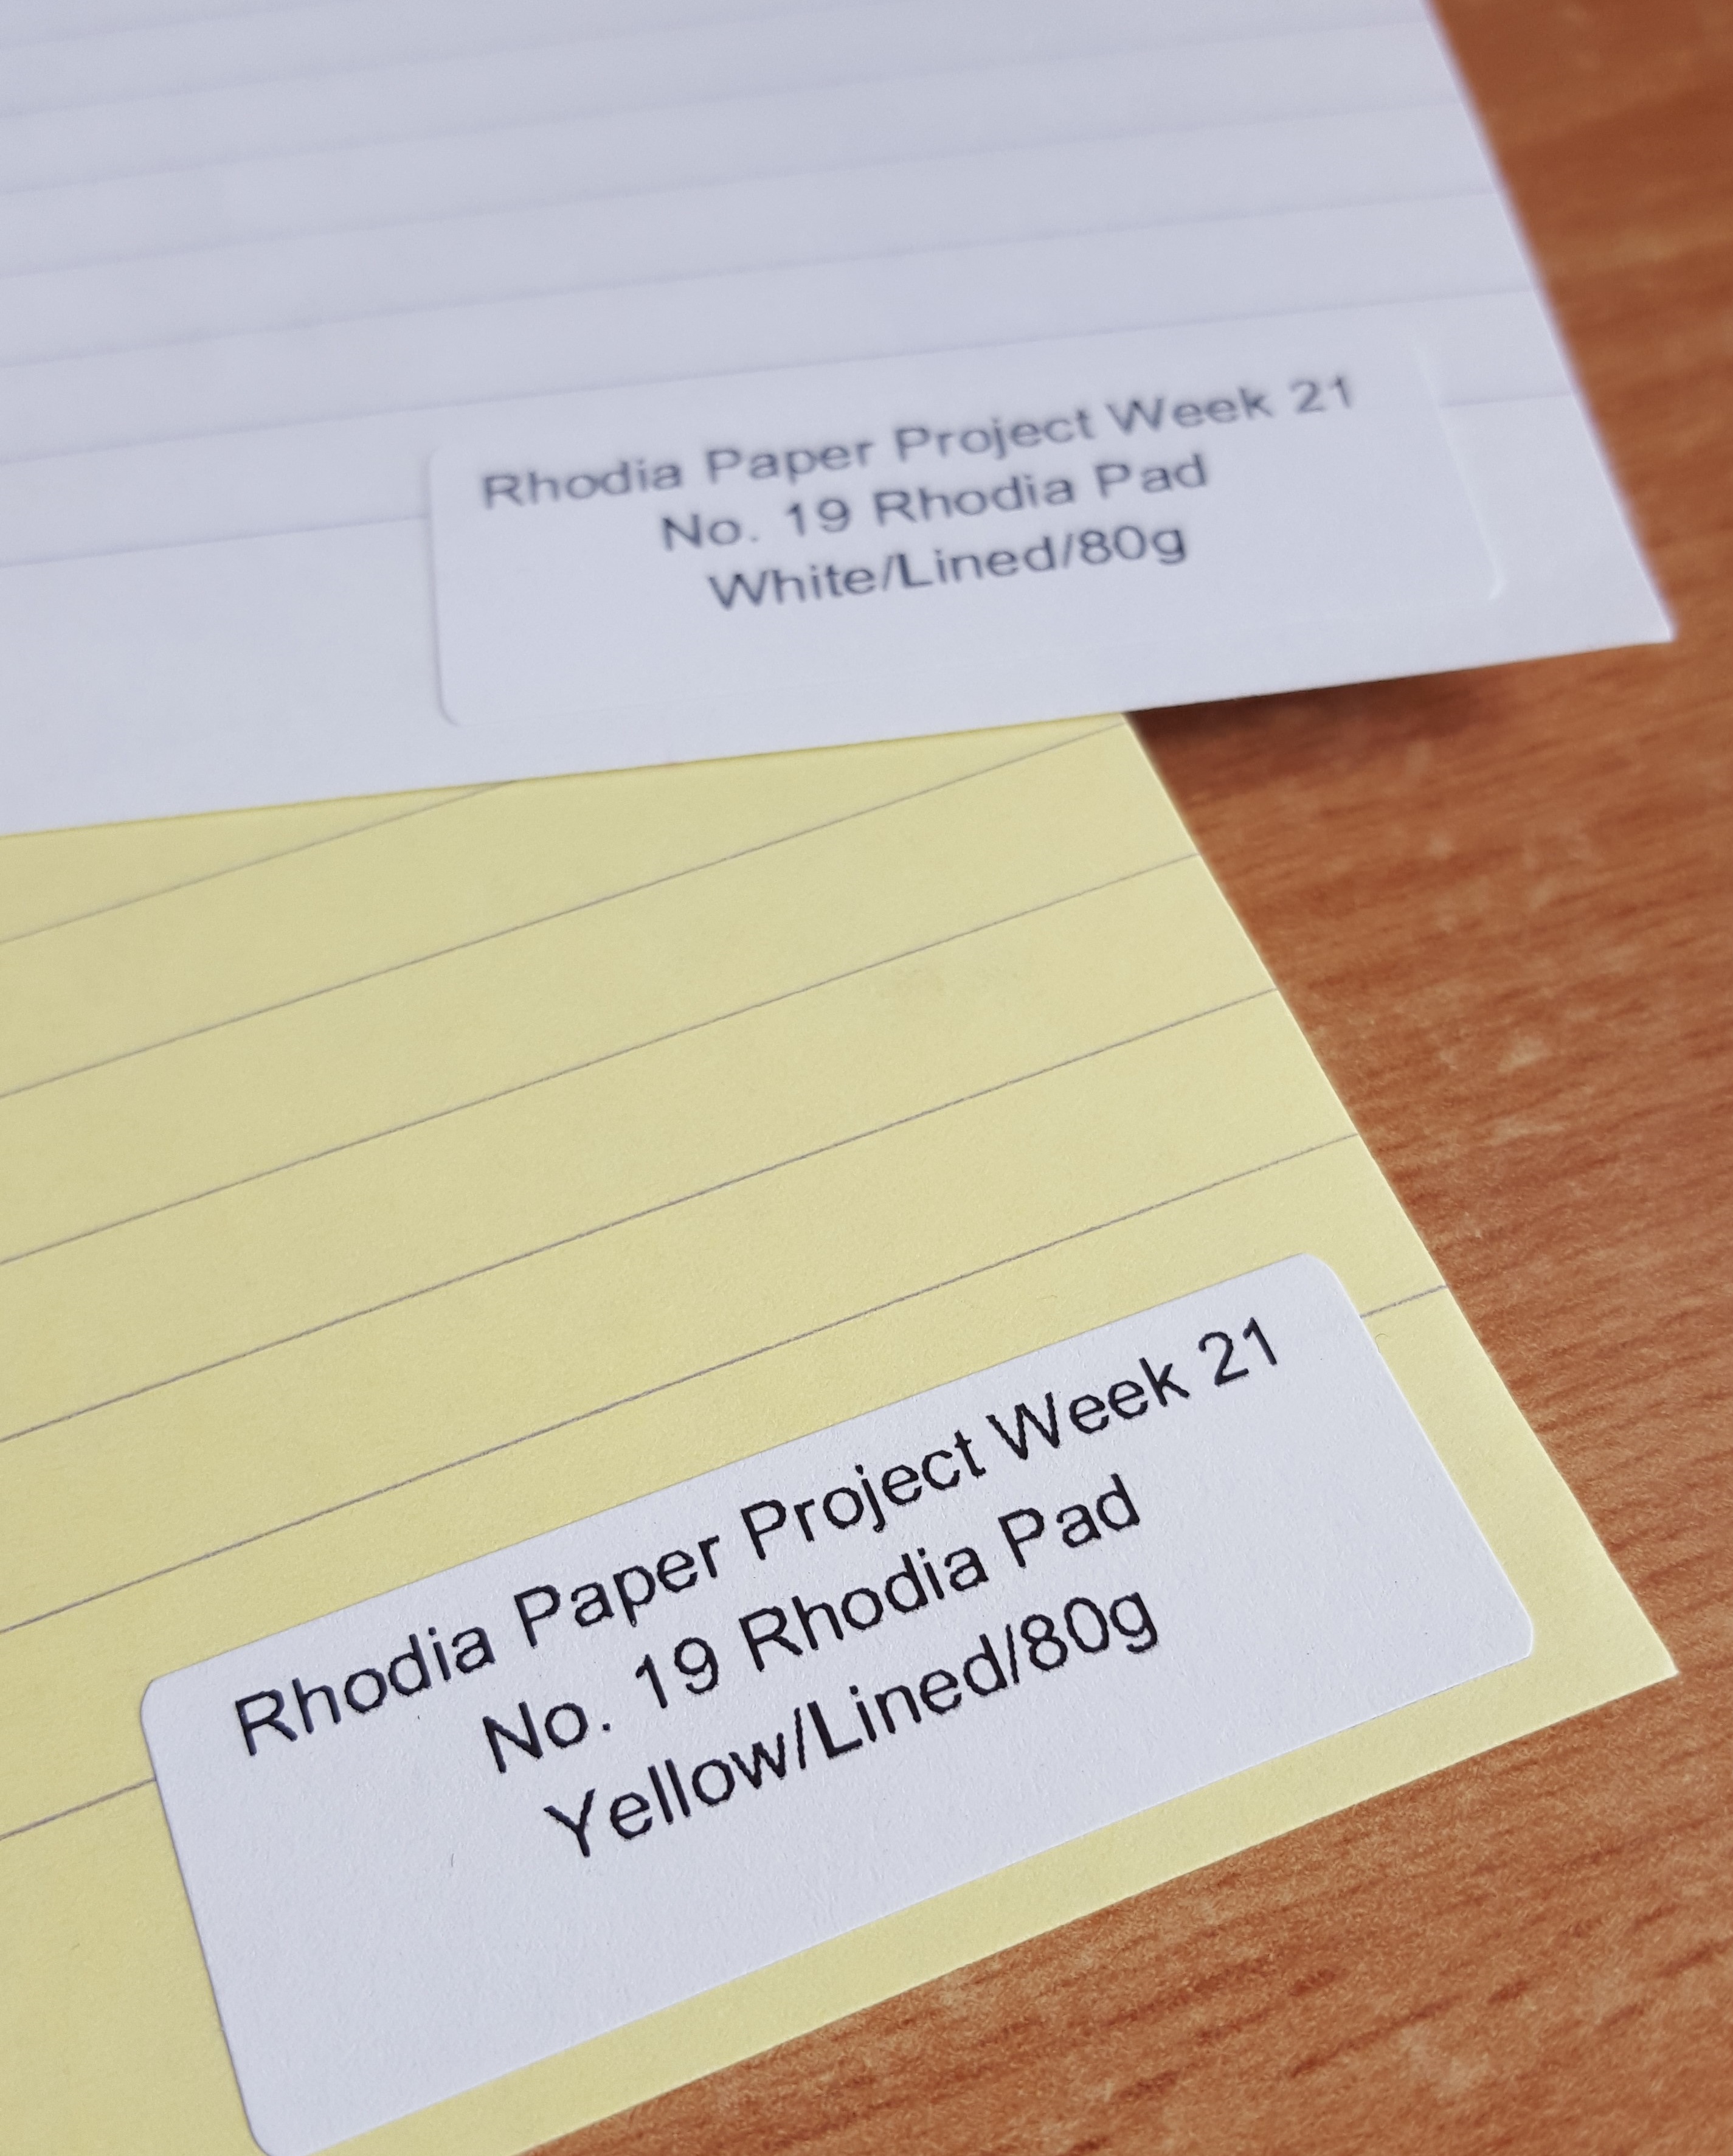 Rhodia Paper Project Week 21 Samples Yellow & White